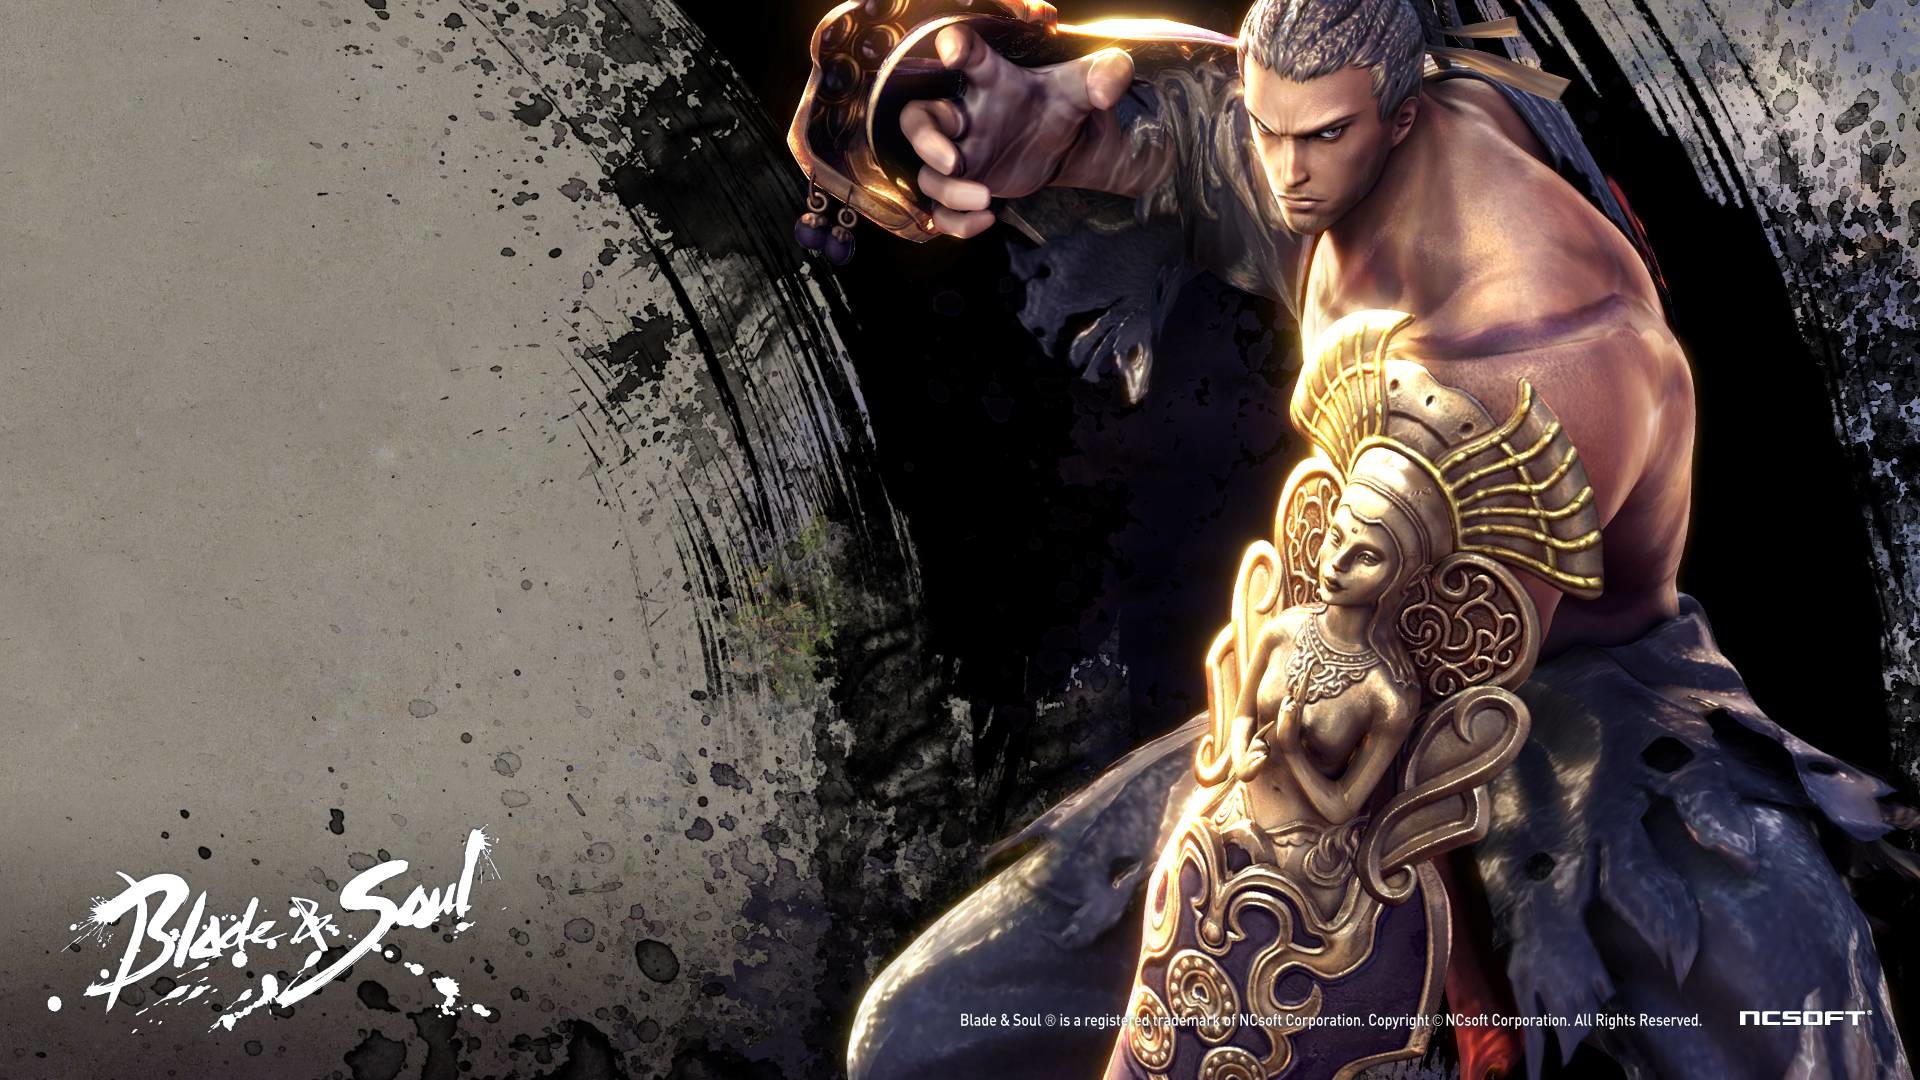 1920x1080 18 Blade And Soul Wallpapers | Blade And Soul Backgrounds